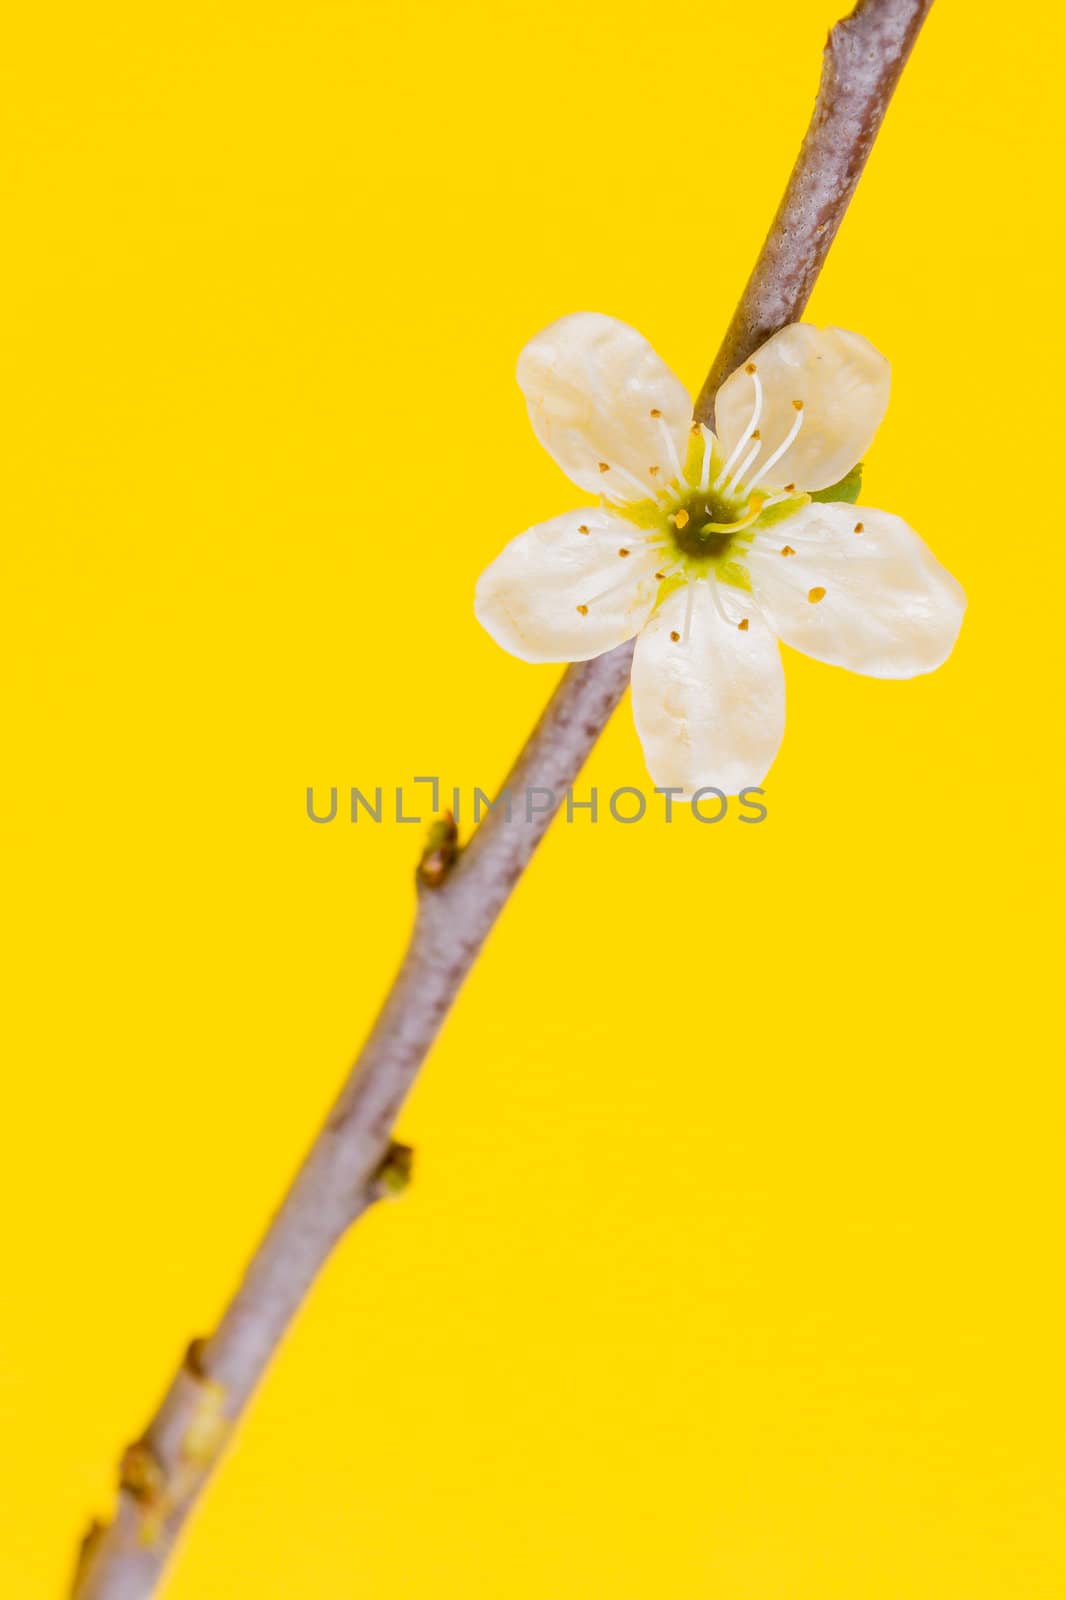 Flower in a tree on a yellow background (spring)